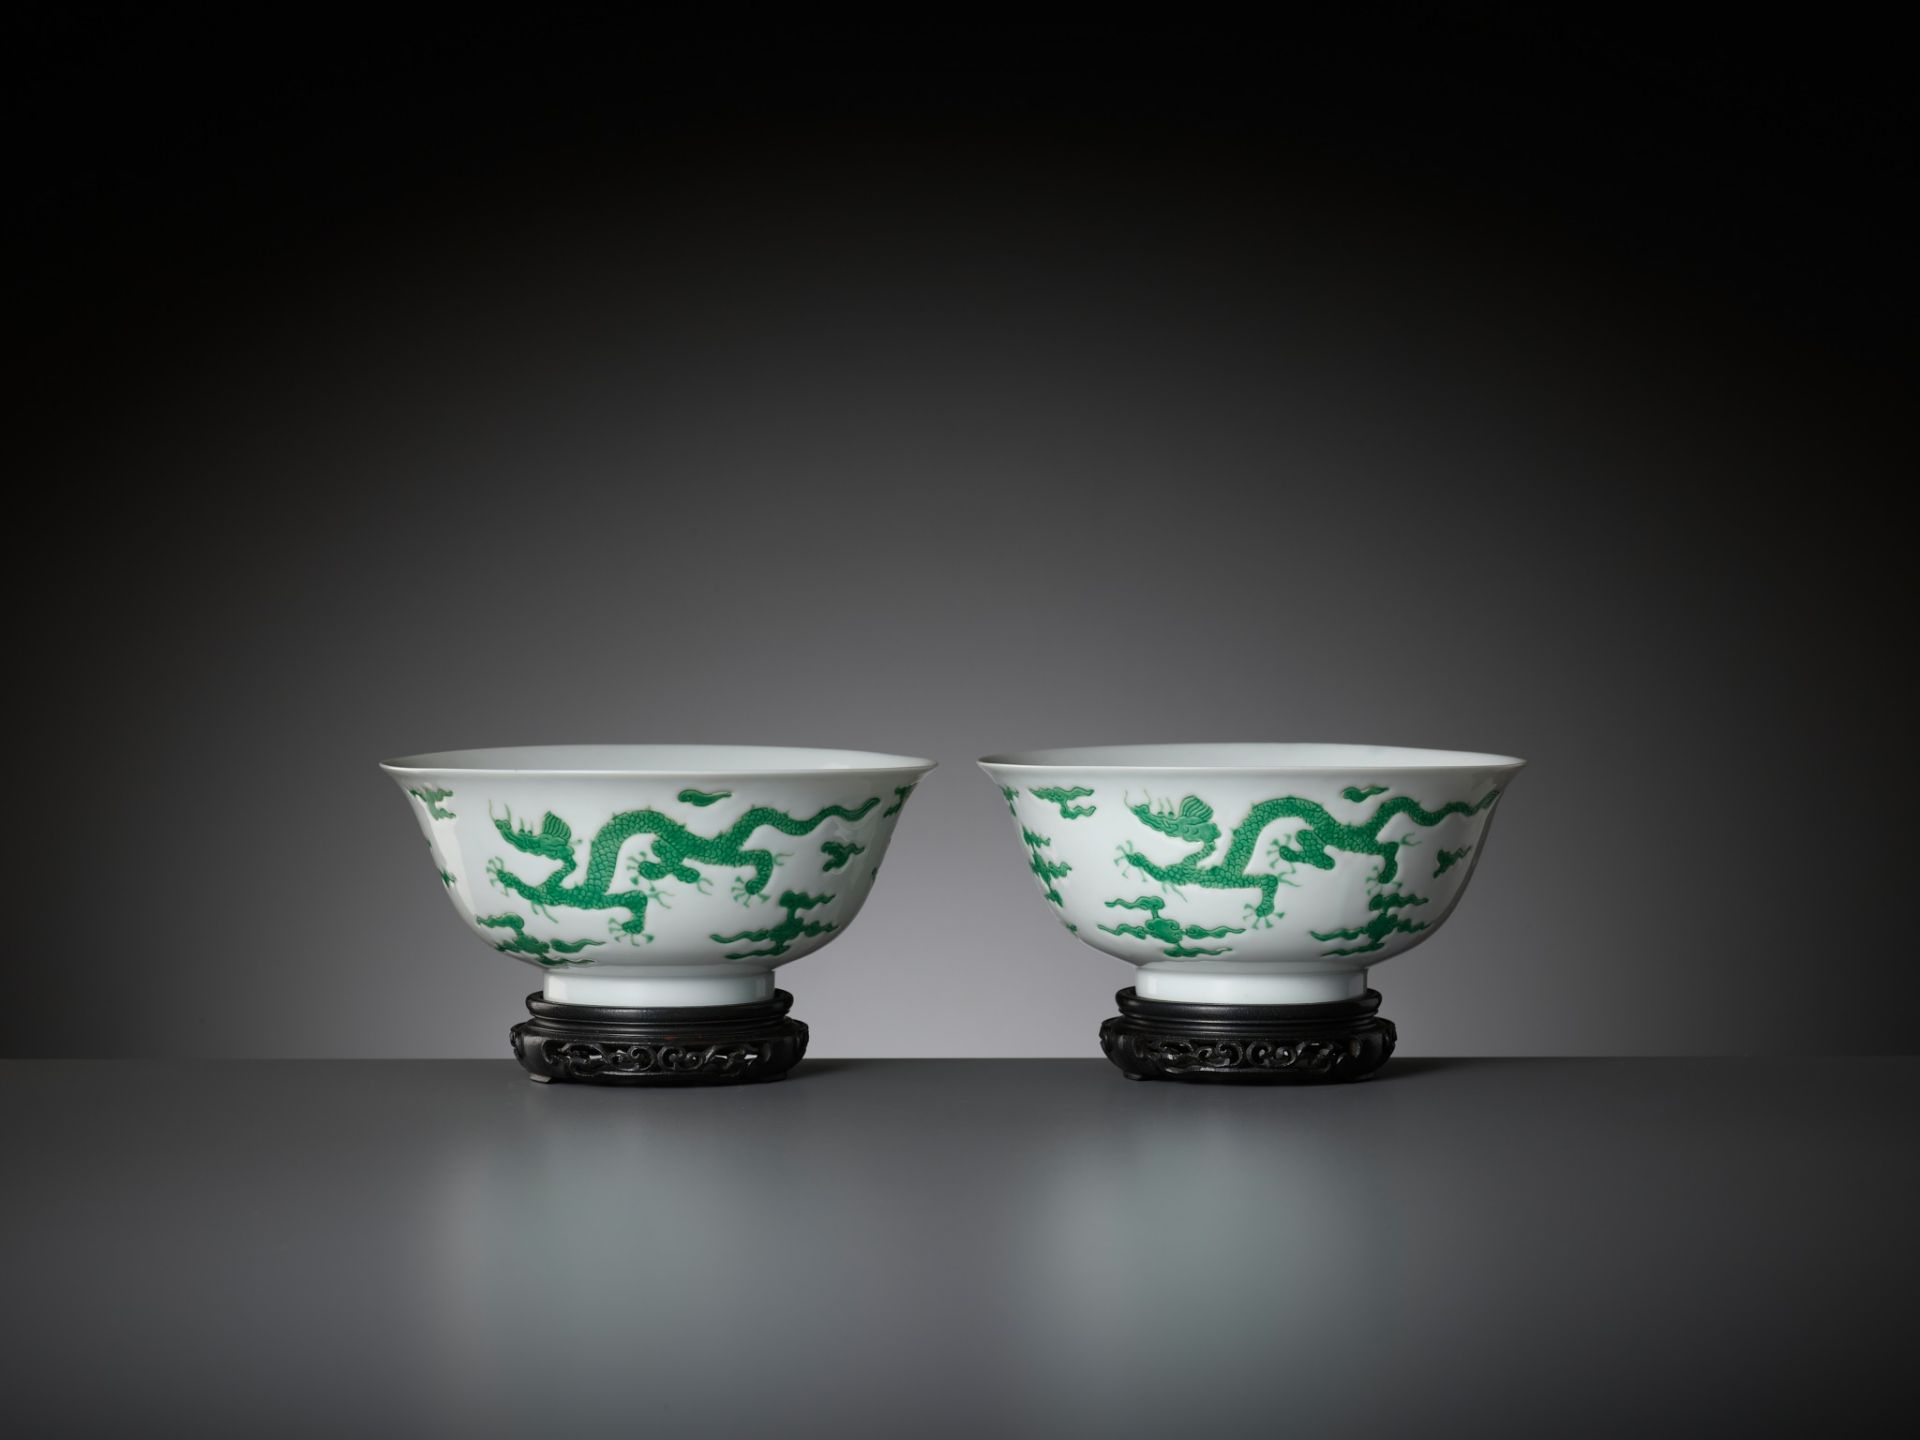 A RARE PAIR OF MING-STYLE GREEN-ENAMELED 'DRAGON' BOWLS, KANGXI PERIOD - Image 11 of 18